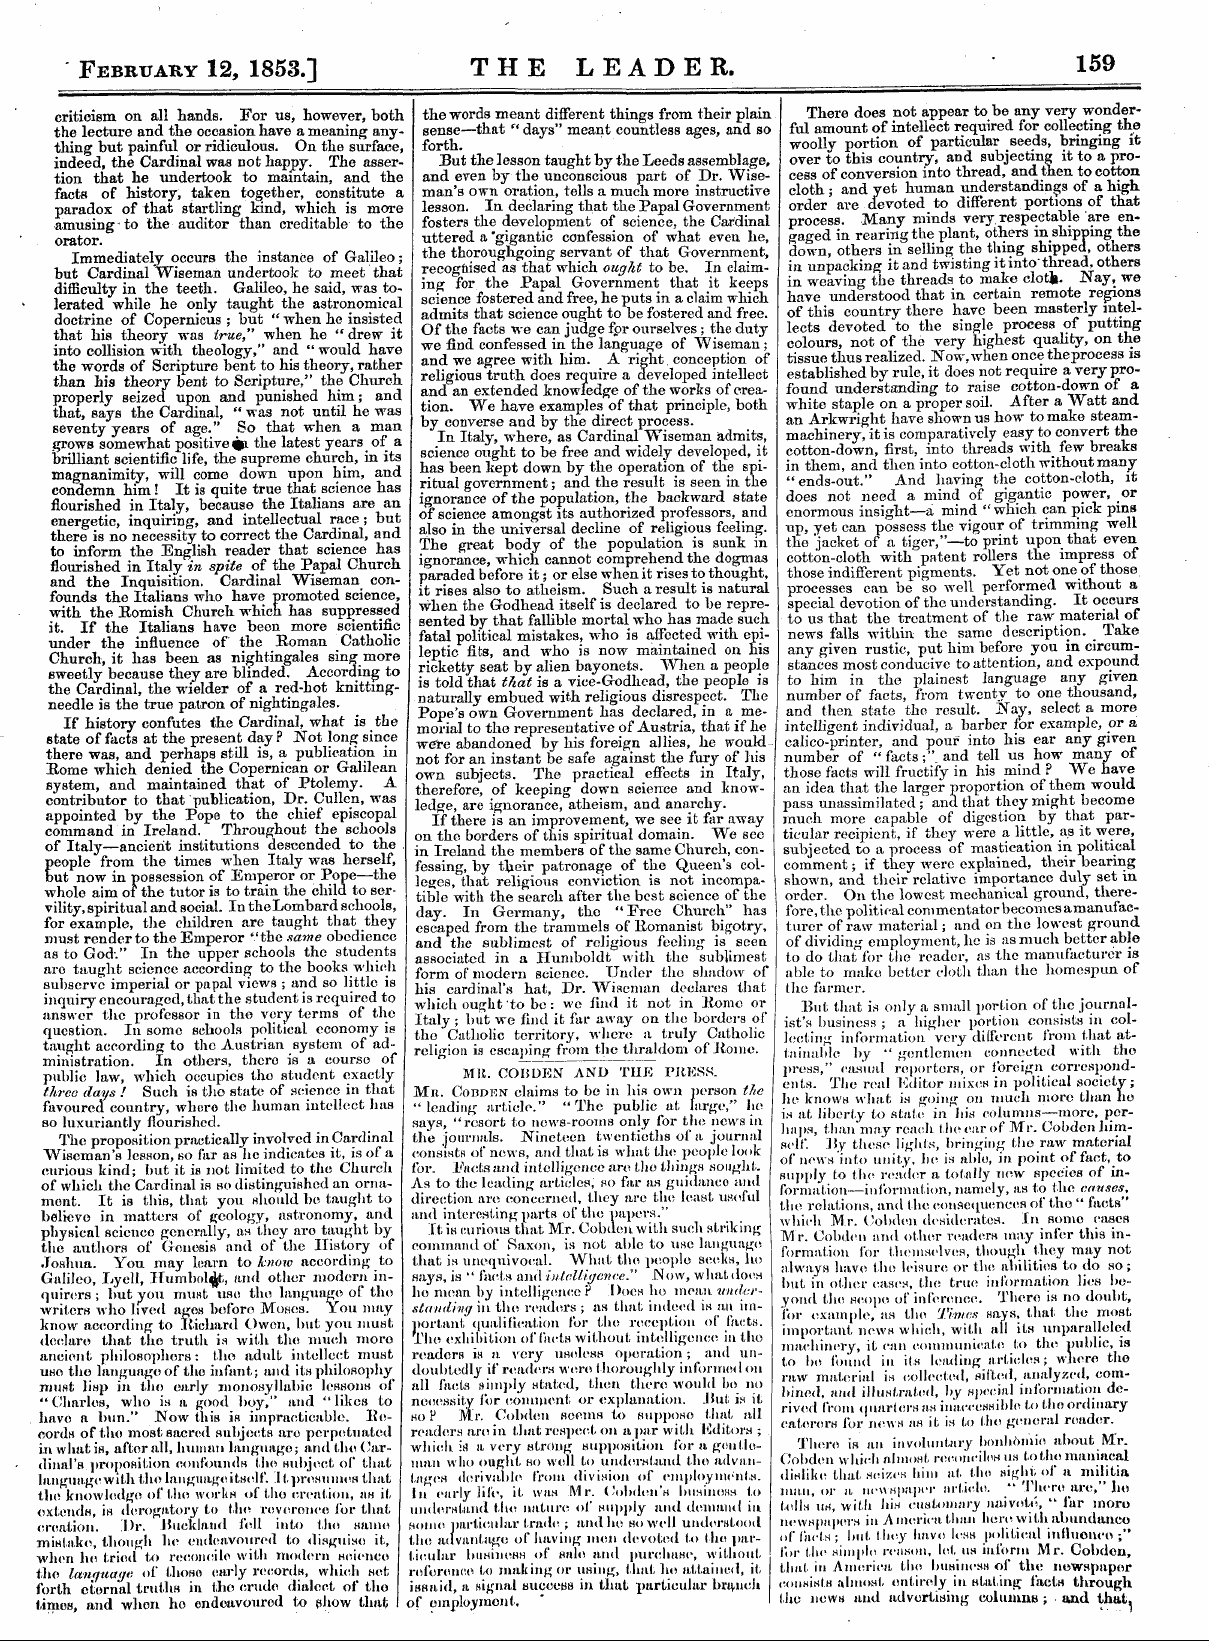 Leader (1850-1860): jS F Y, 1st edition: 15